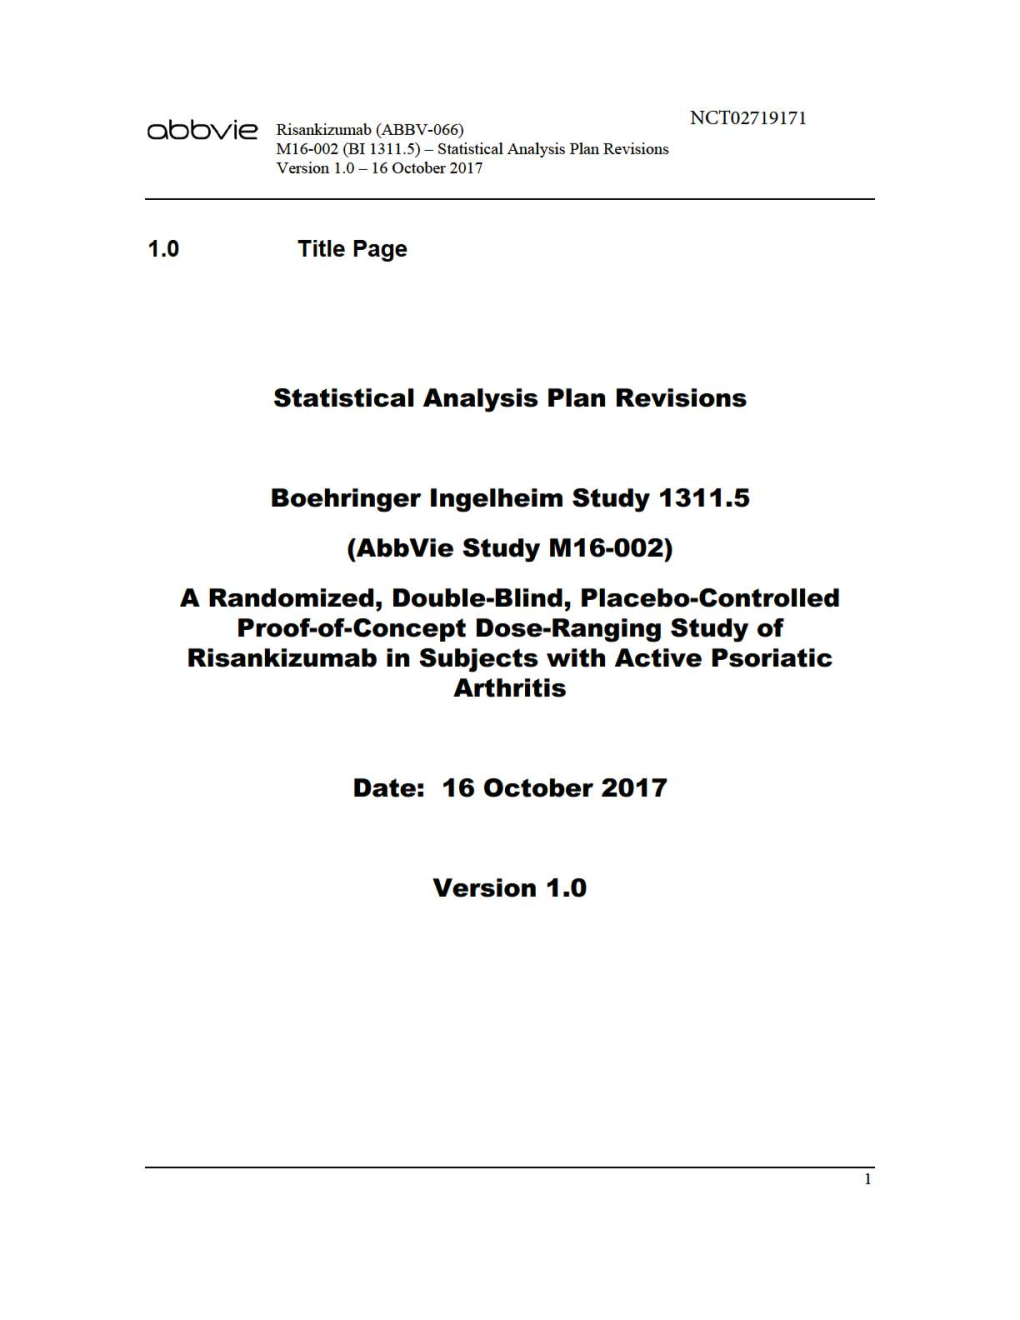 Statistical Analysis Plan Revisions Version 1.0 – 16 October 2017